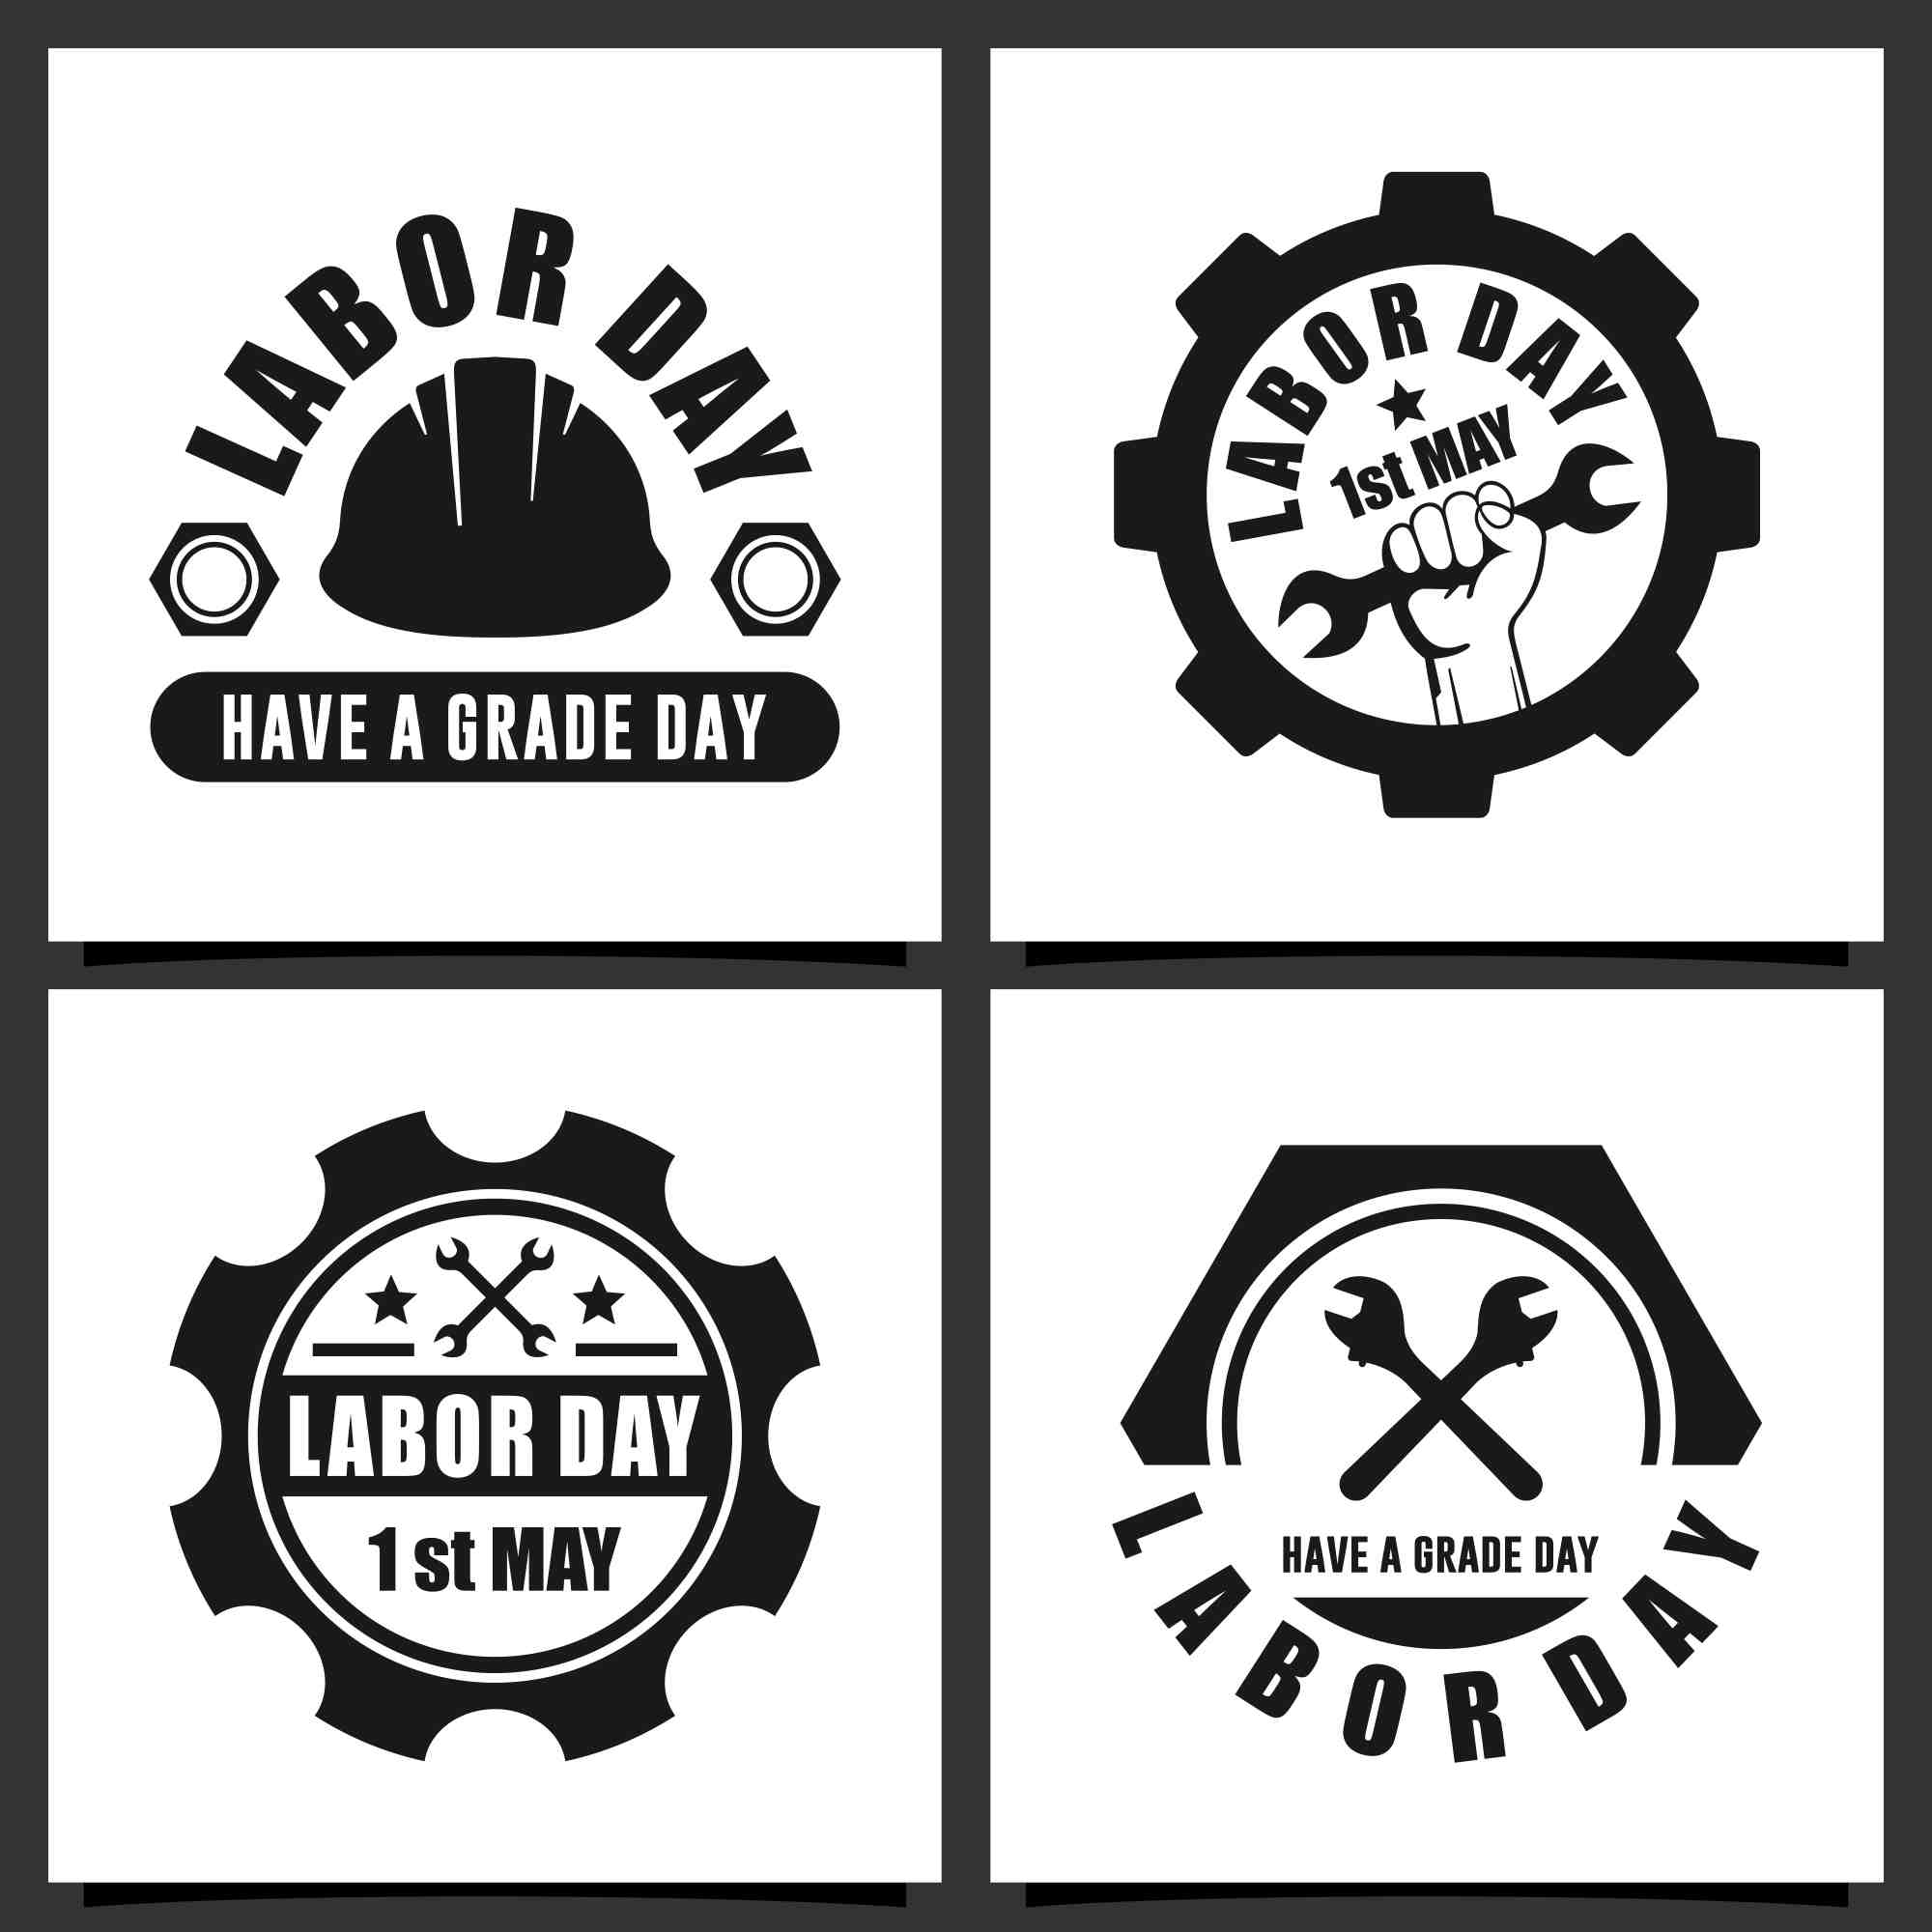 17 Labor Day badge stamps logo design - $6 preview image.